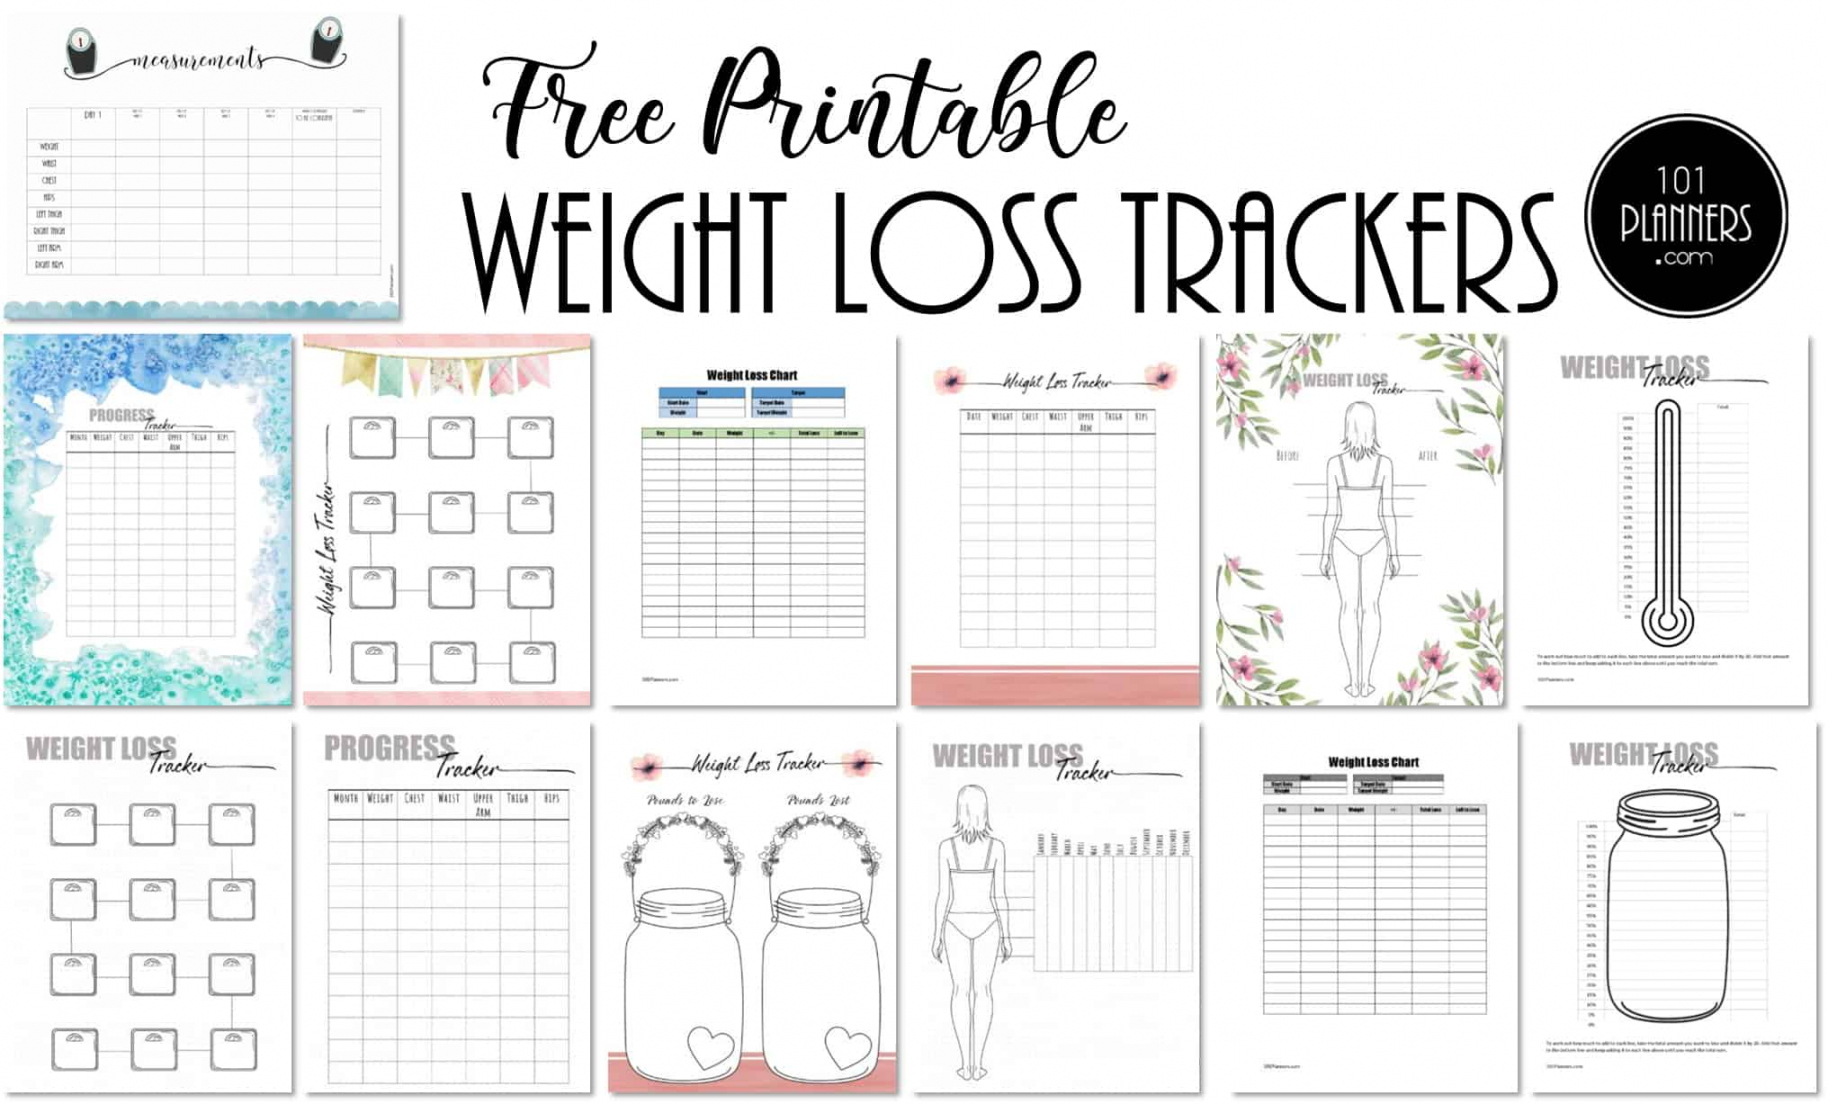 FREE Weight Loss Tracker Printable  Customize before you Print - FREE Printables - Free Printable Weight Loss Tracker